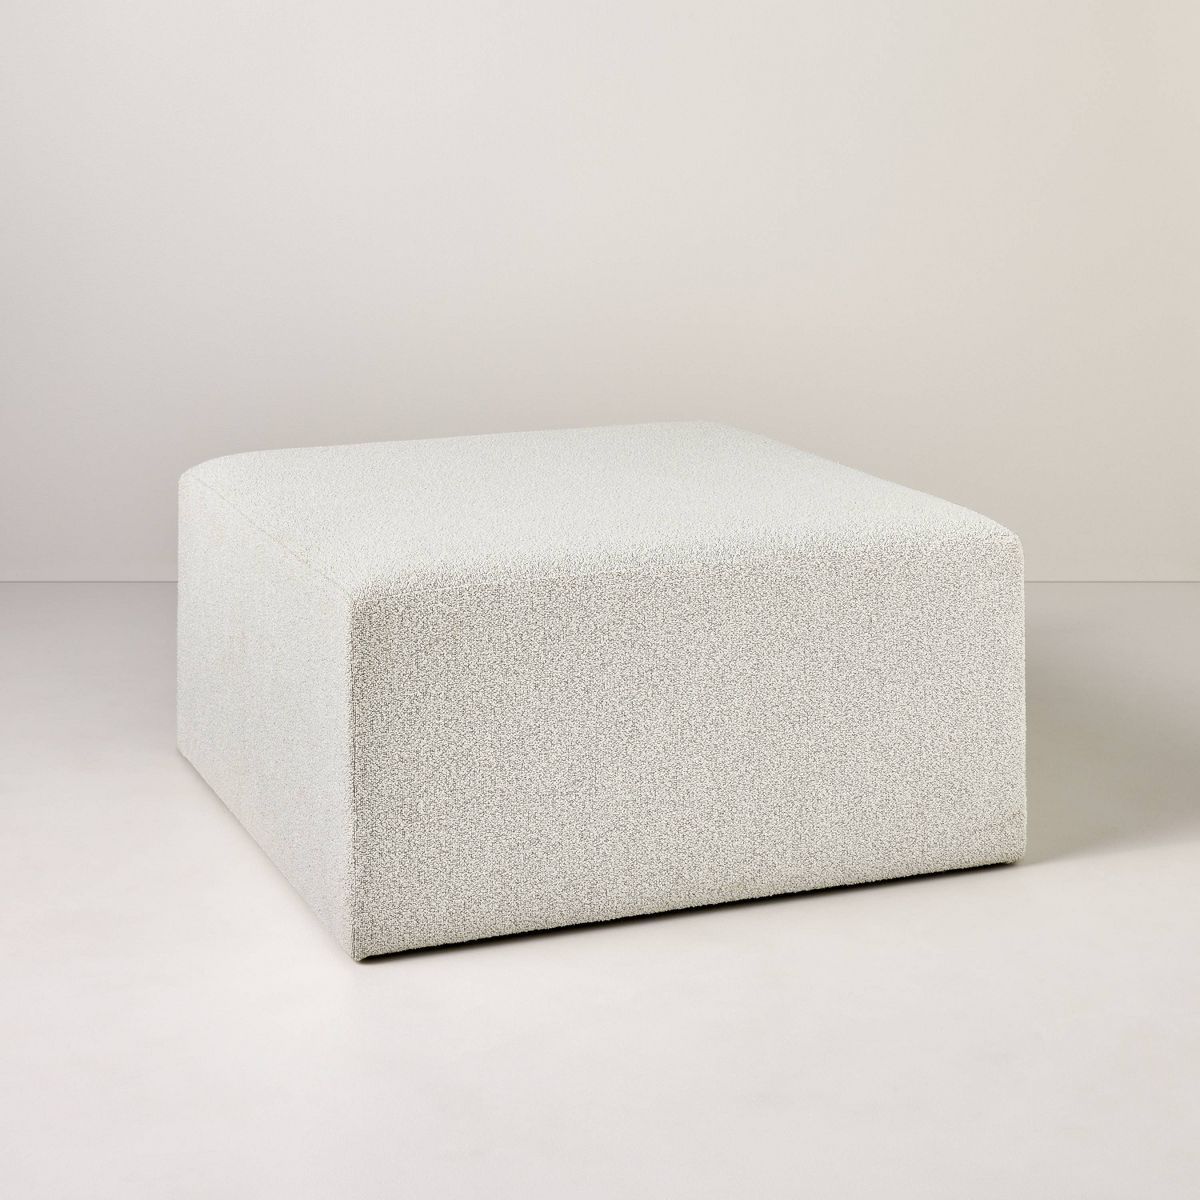 Boucle Upholstered Square Cocktail Ottoman - Oatmeal - Hearth & Hand™ with Magnolia | Target